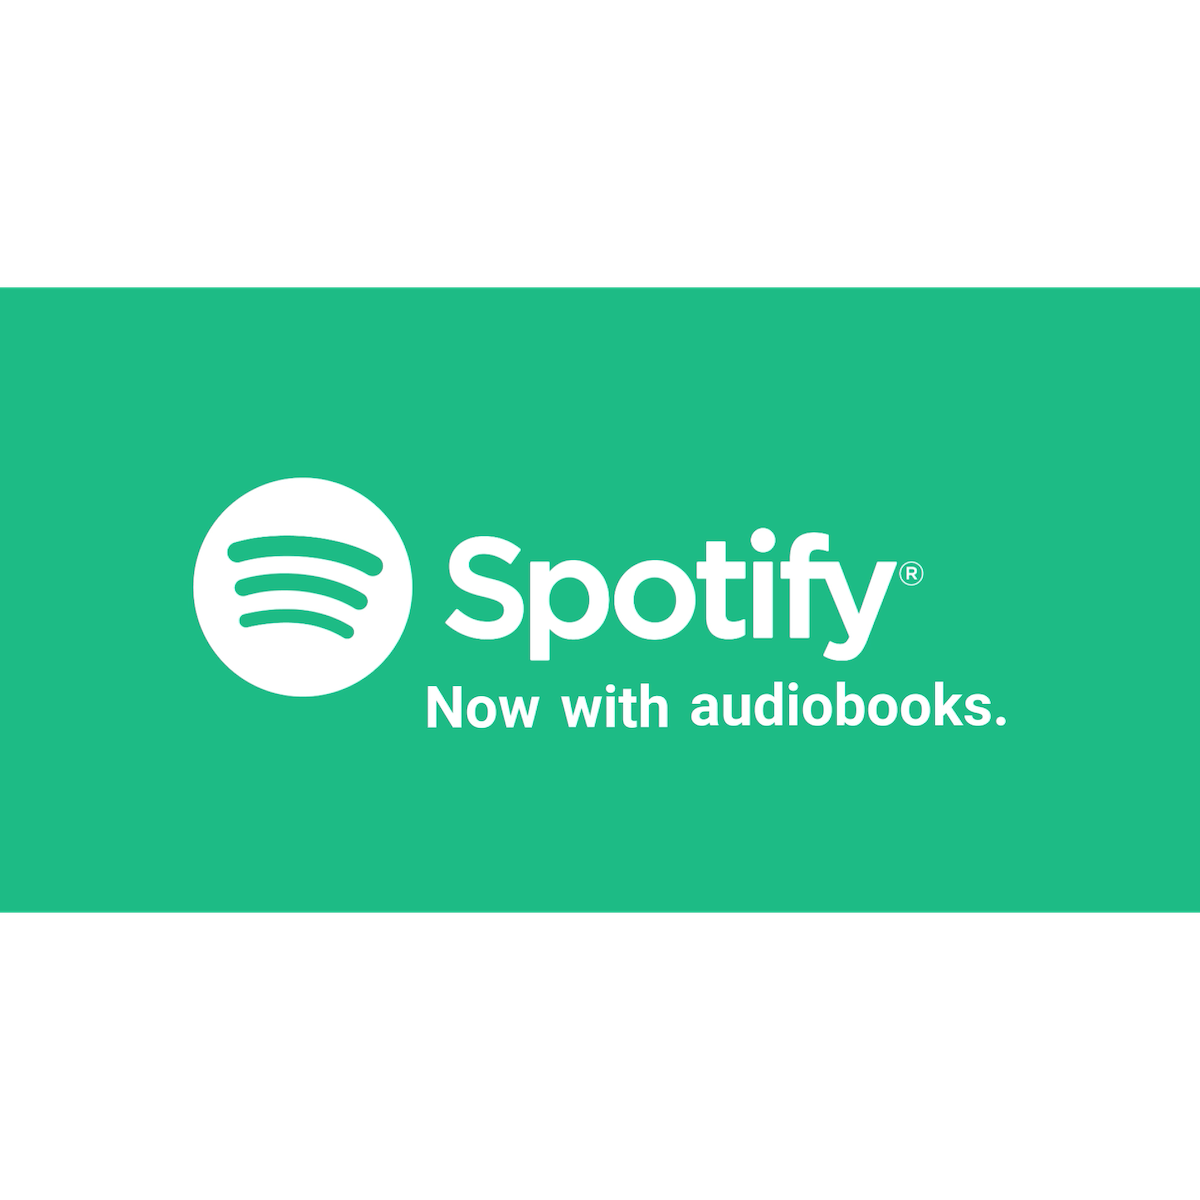 Purchase the audiobook of Fog & Fireflies by T.H. Lehnen from Spotify